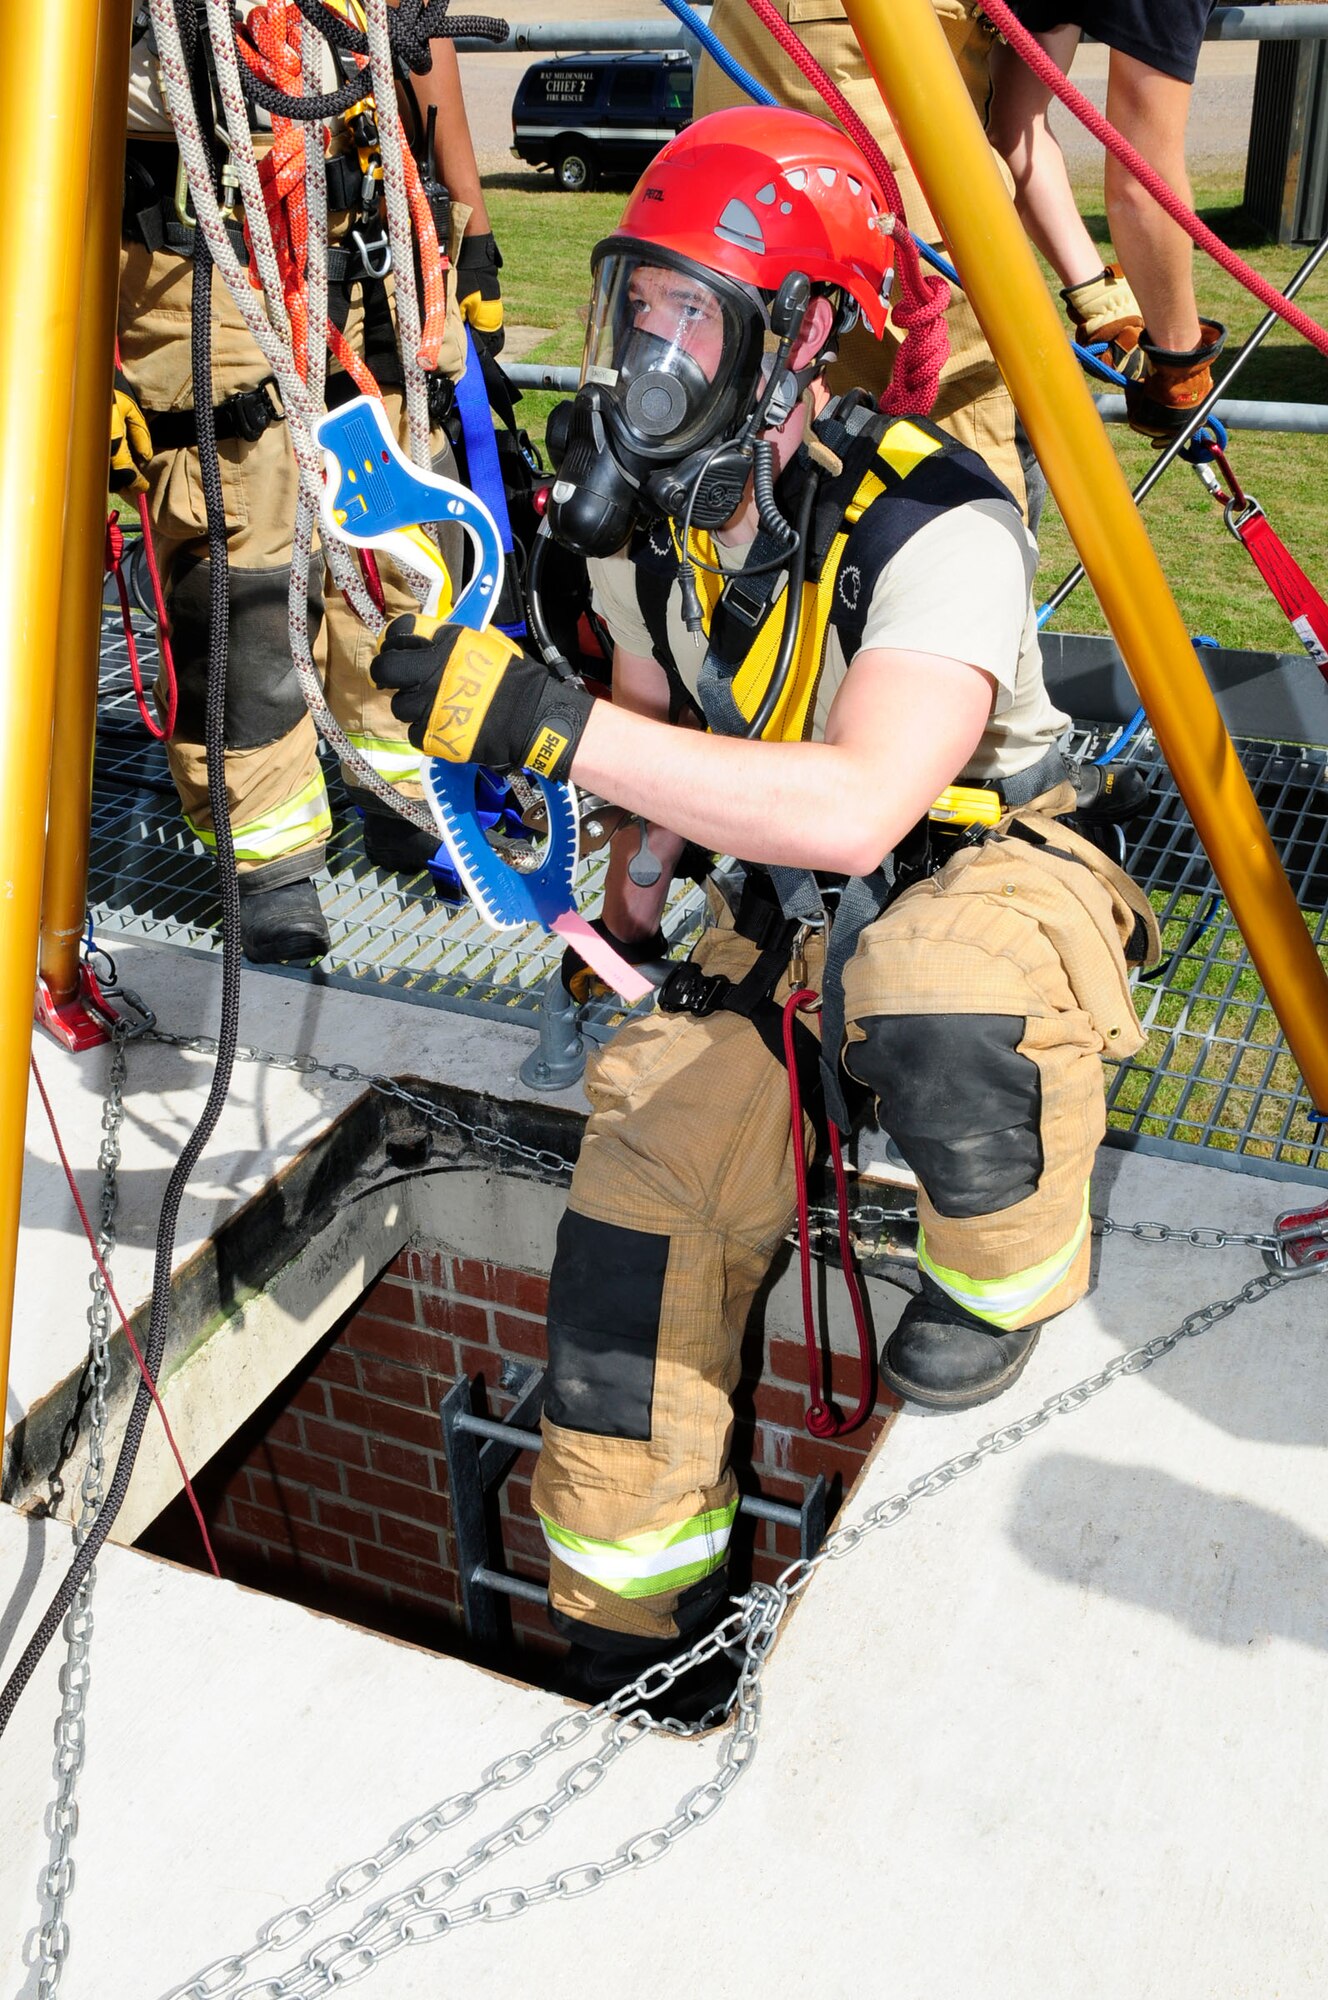 U.S. Air Force Senior Airman Jacob Urry, 100th Civil Engineer Squadron Fire Department firefighter and driver/operator from Kennewick, Wash., prepares to enter a confined space during training as part of a U.S. Air Forces in Europe inspection June 26, 2014, at the fire training area on RAF Mildenhall, England. Urry took a cervical collar into the confined space to place on a victim for stabilization prior to removal from the hazardous area. (U.S. Air Force photo/Karen Abeyasekere/Released)